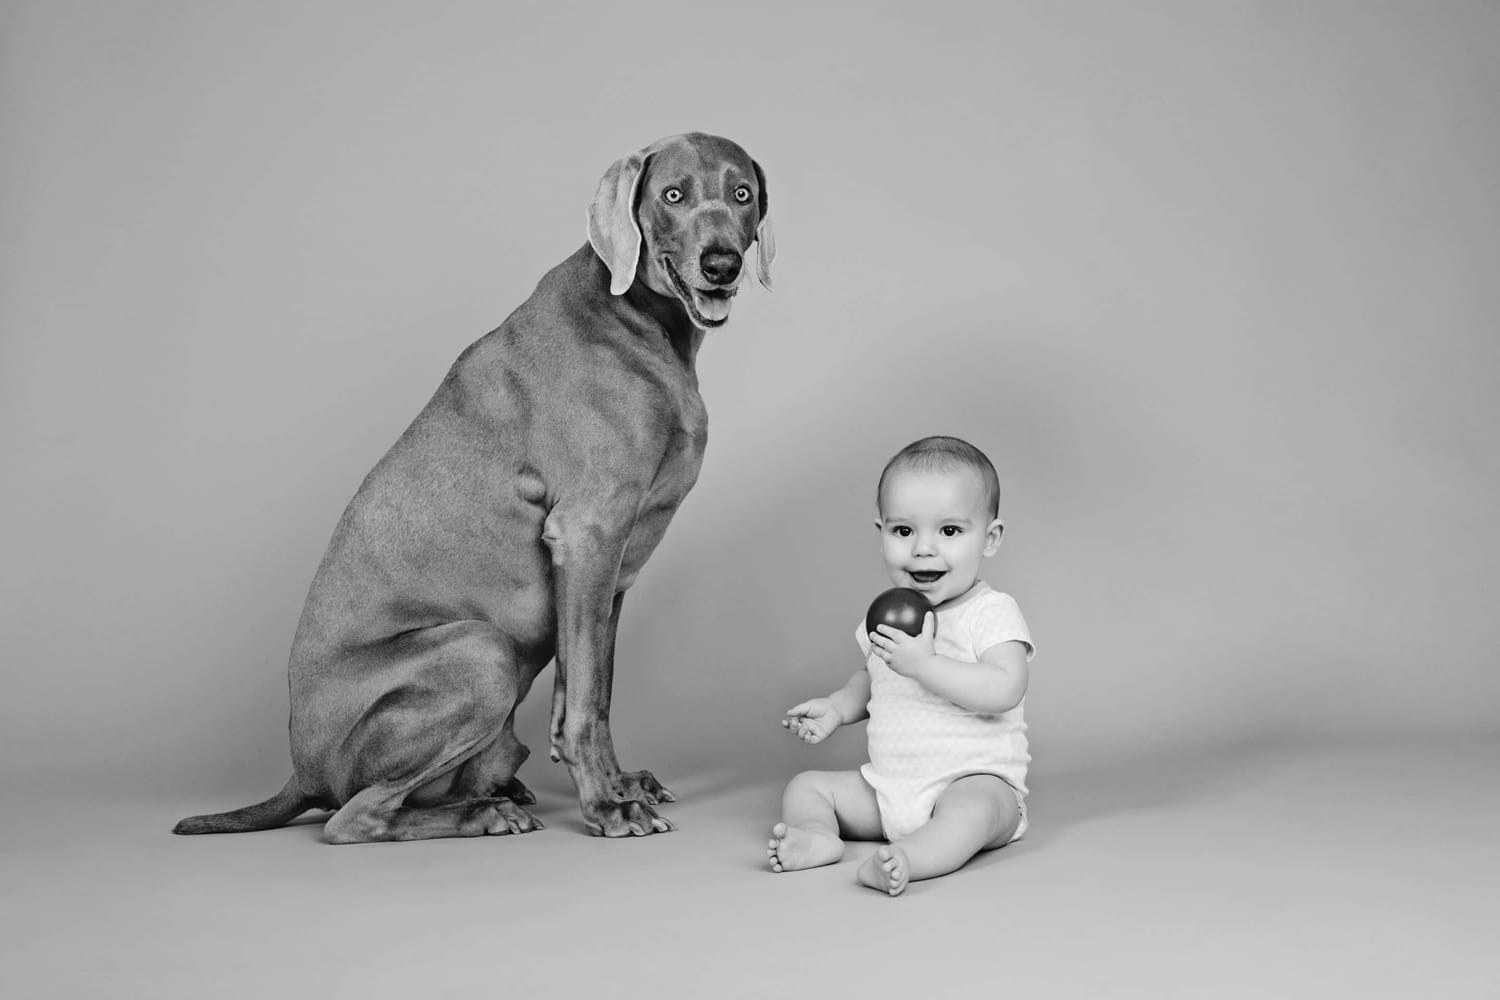 A baby holds a ball and takes a photo with a dog.